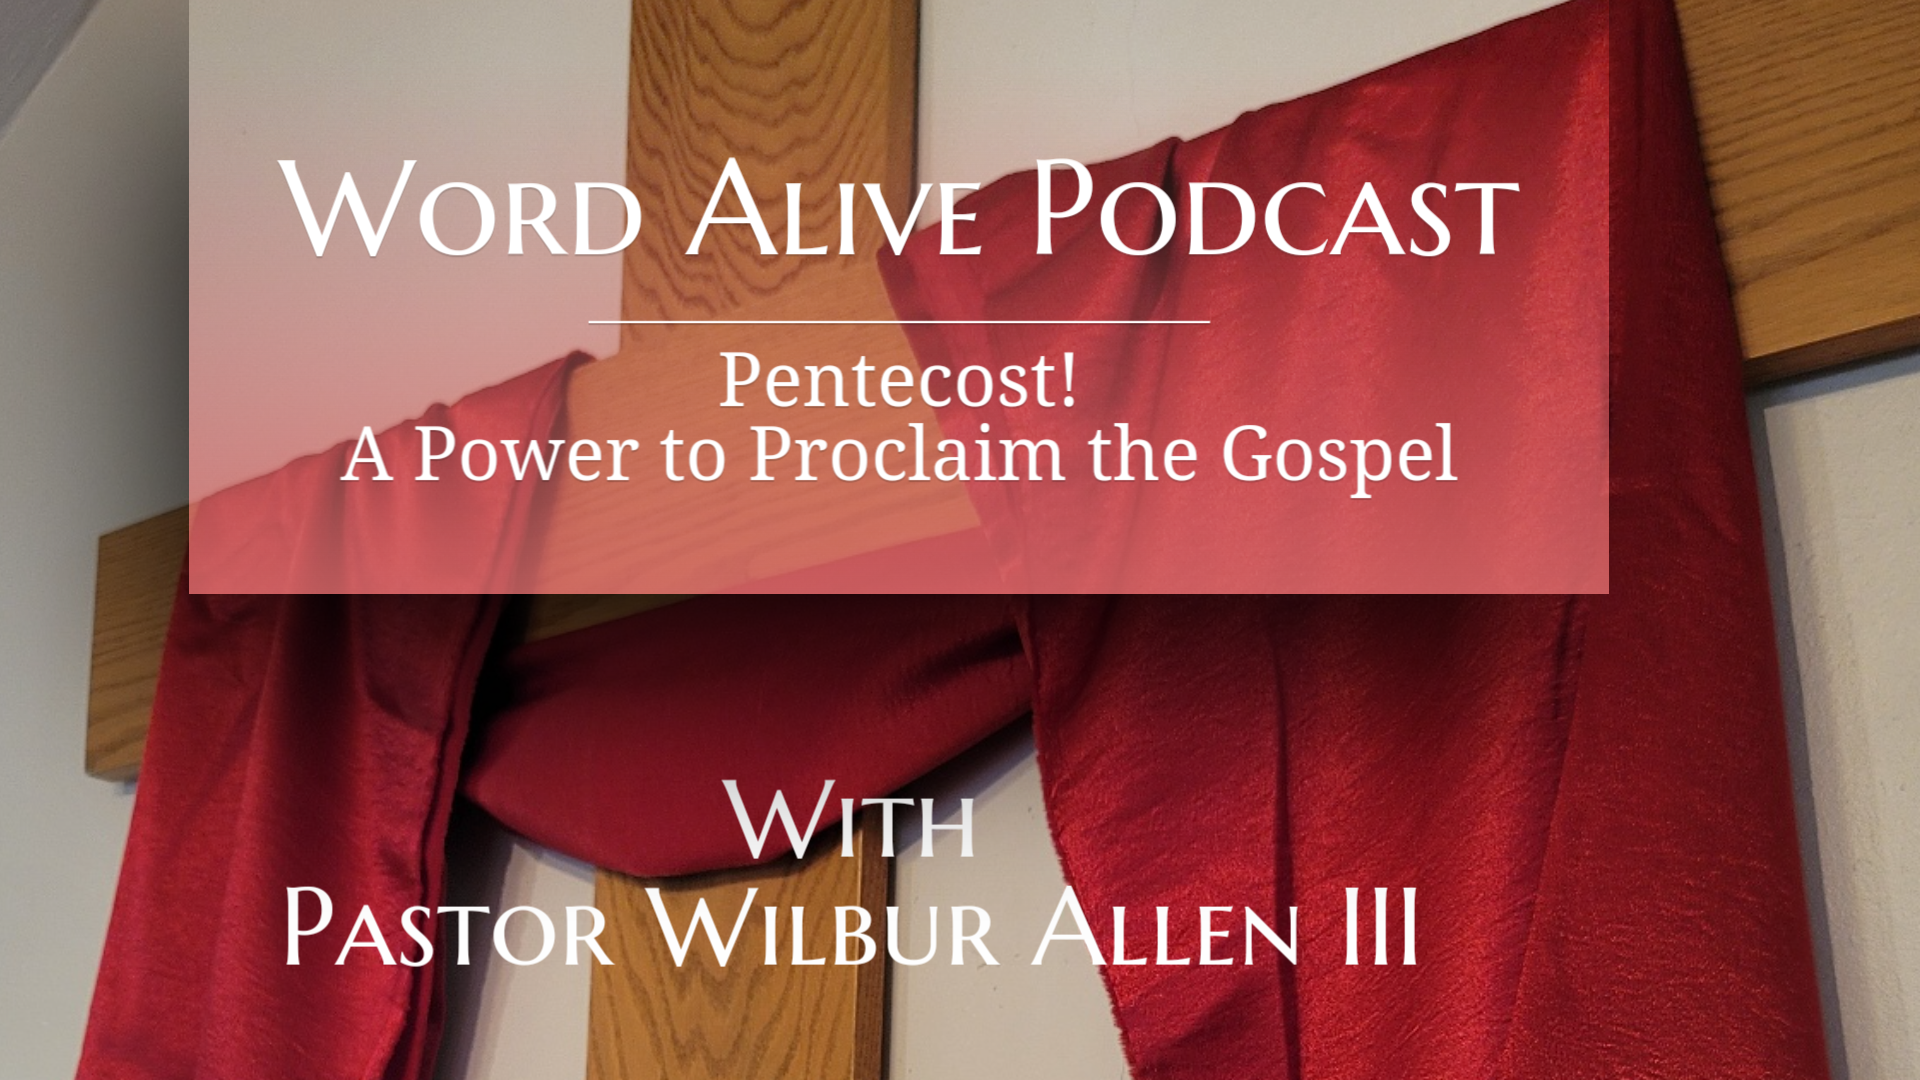 Word Alive Podcast - The Power of Pentecost